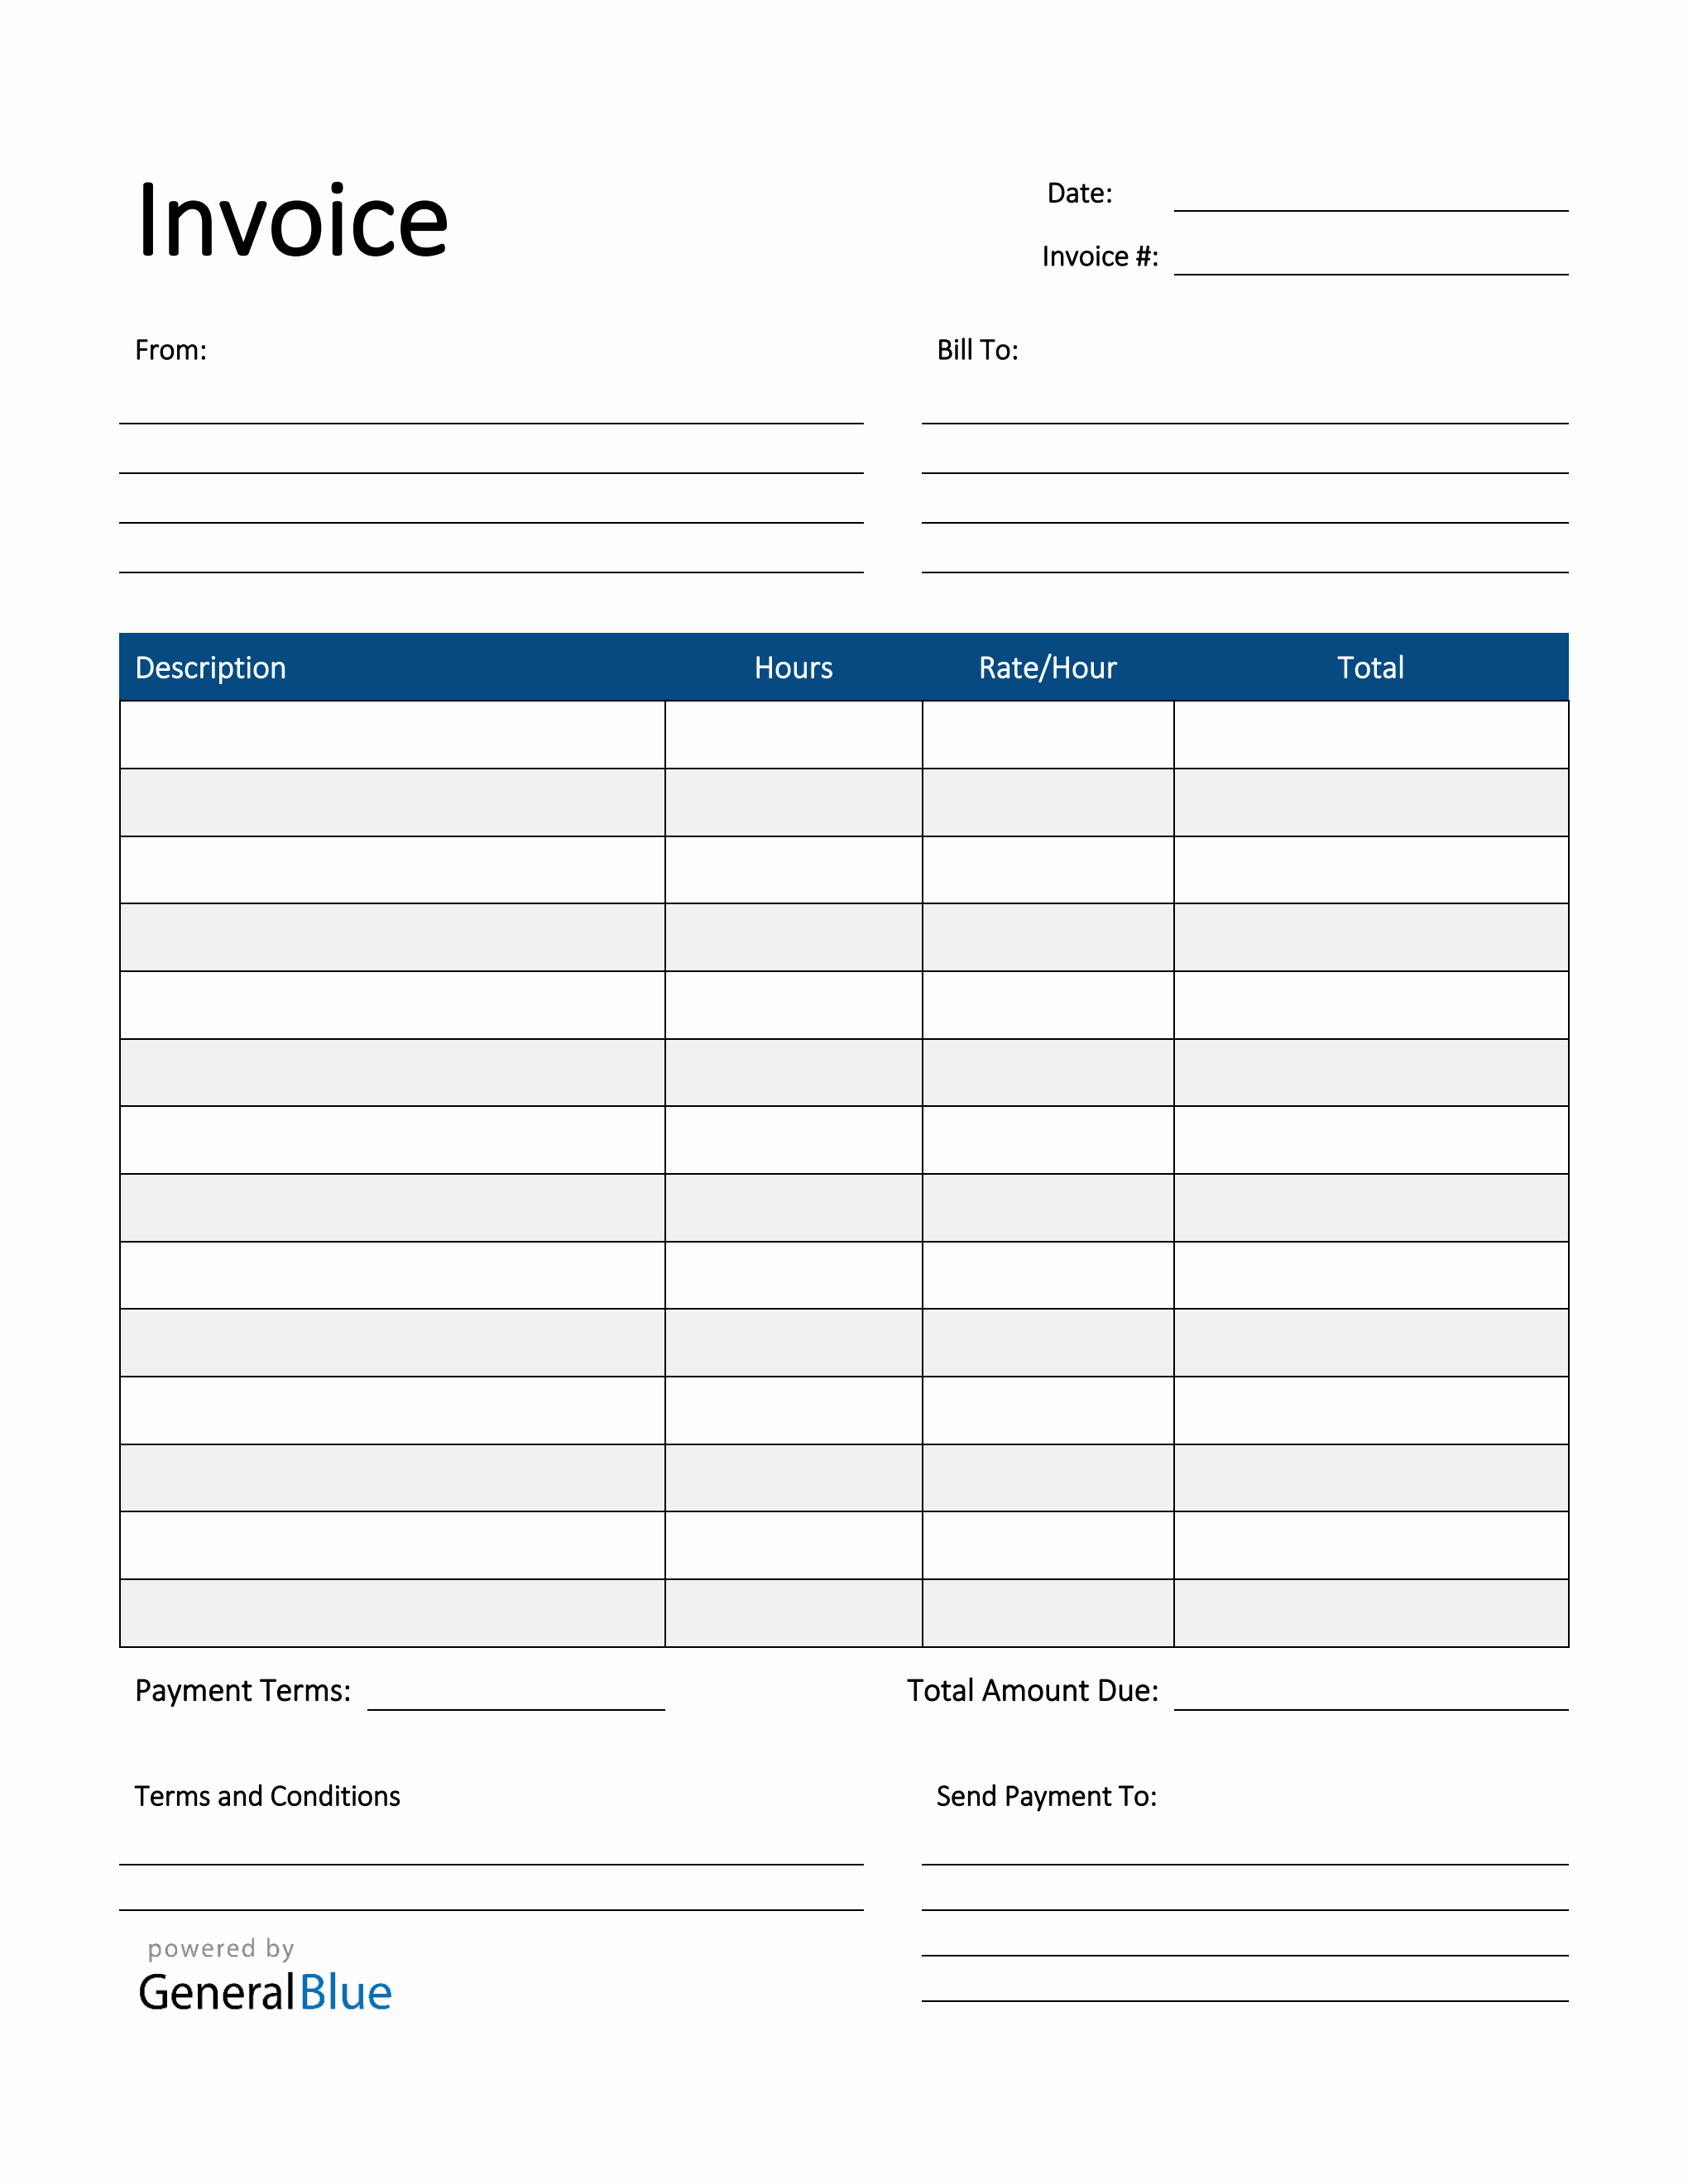 freelance-hourly-invoice-template-in-pdf-striped